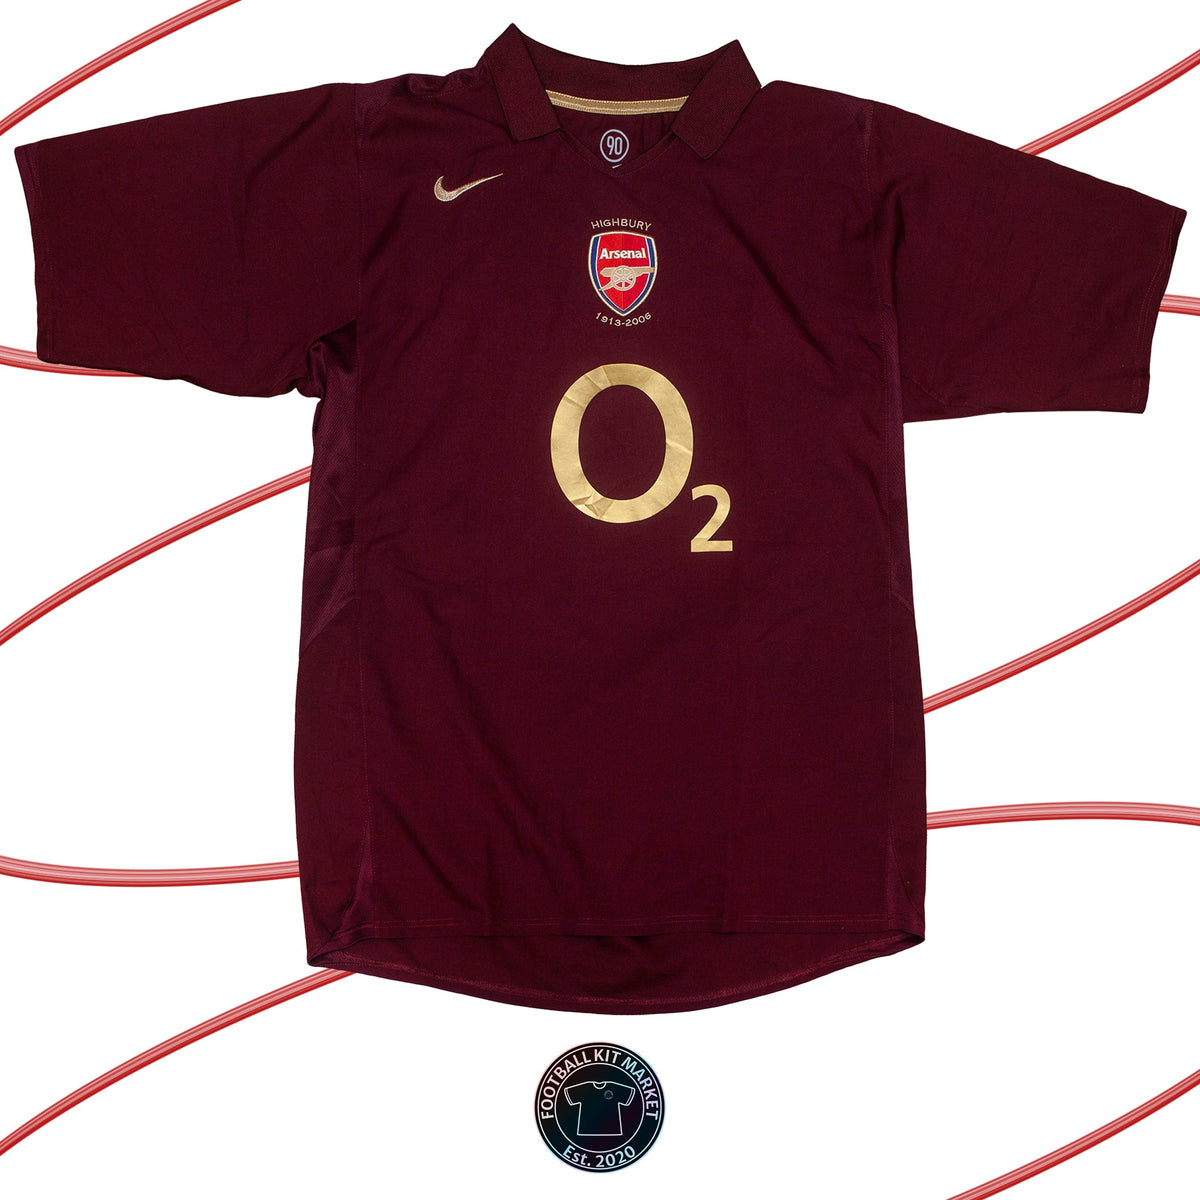 Genuine ARSENAL Home (2005-2006) - NIKE (XL) - Product Image from Football Kit Market